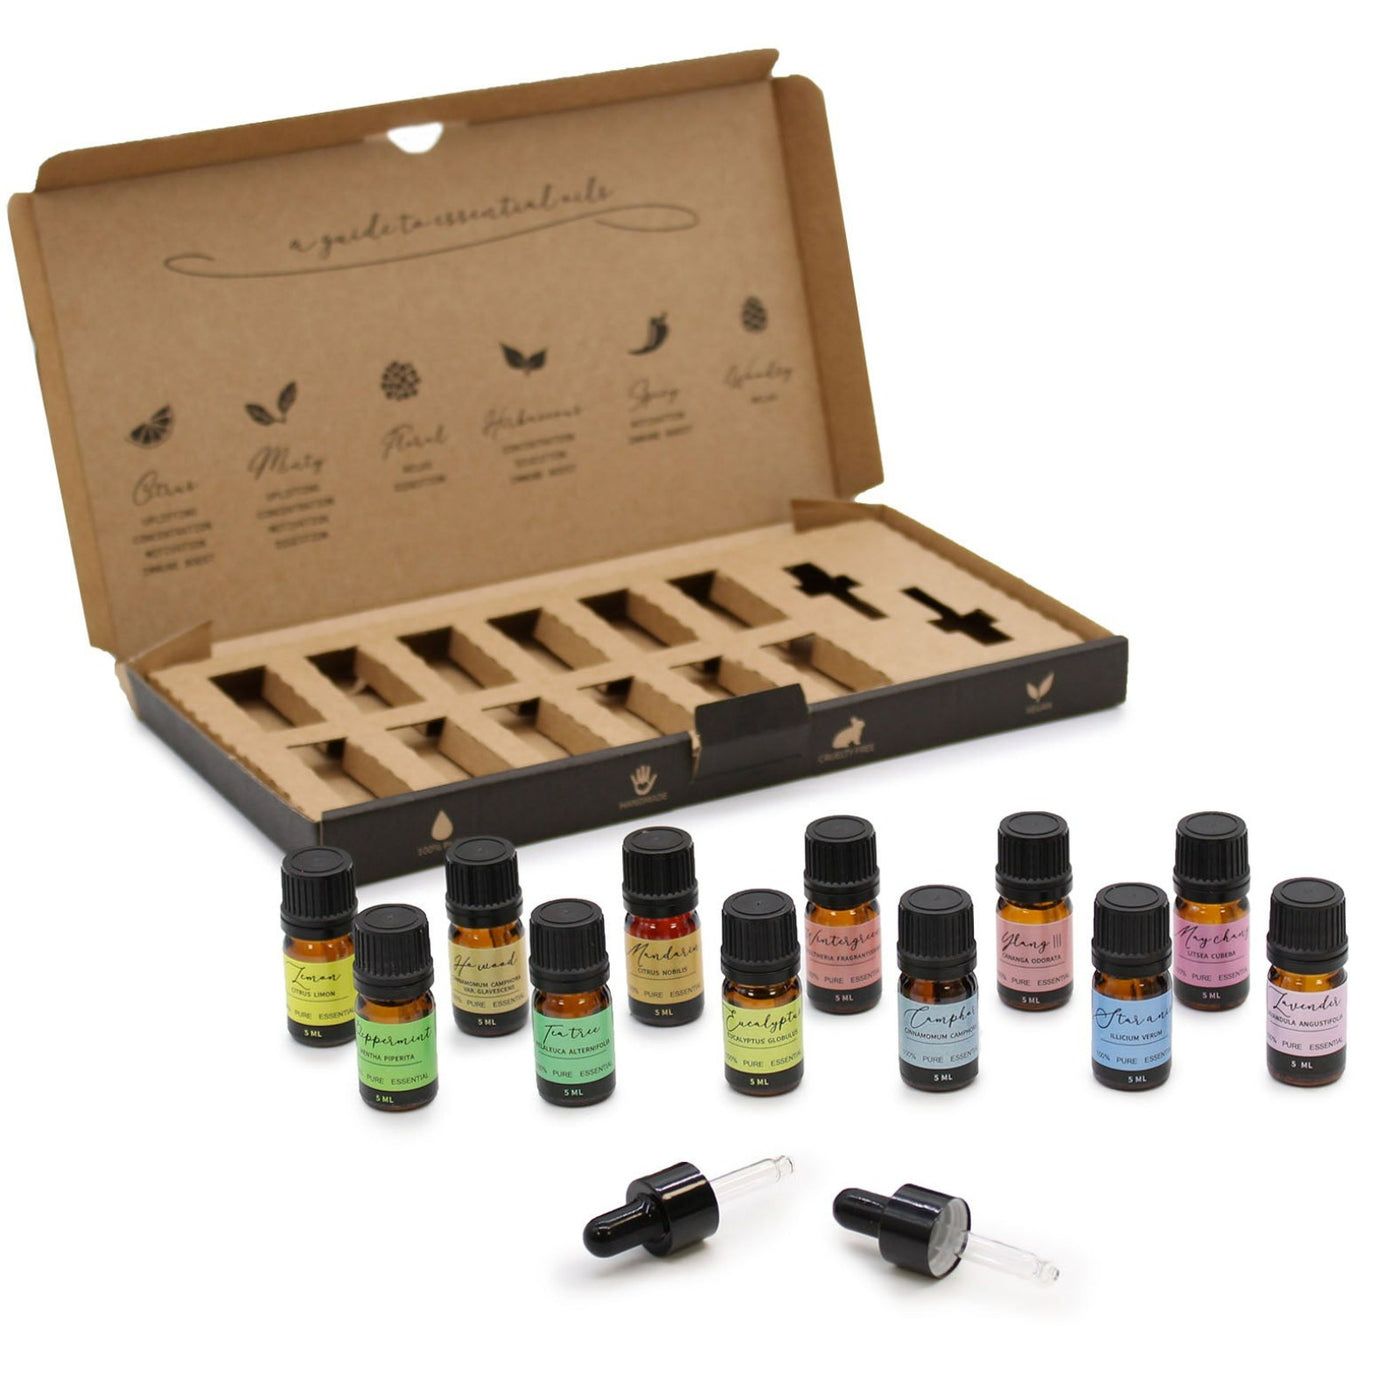 Aromatherapy Essential Oil Gift Set With Natural Fragrance Oils,Packed In Gift Box.